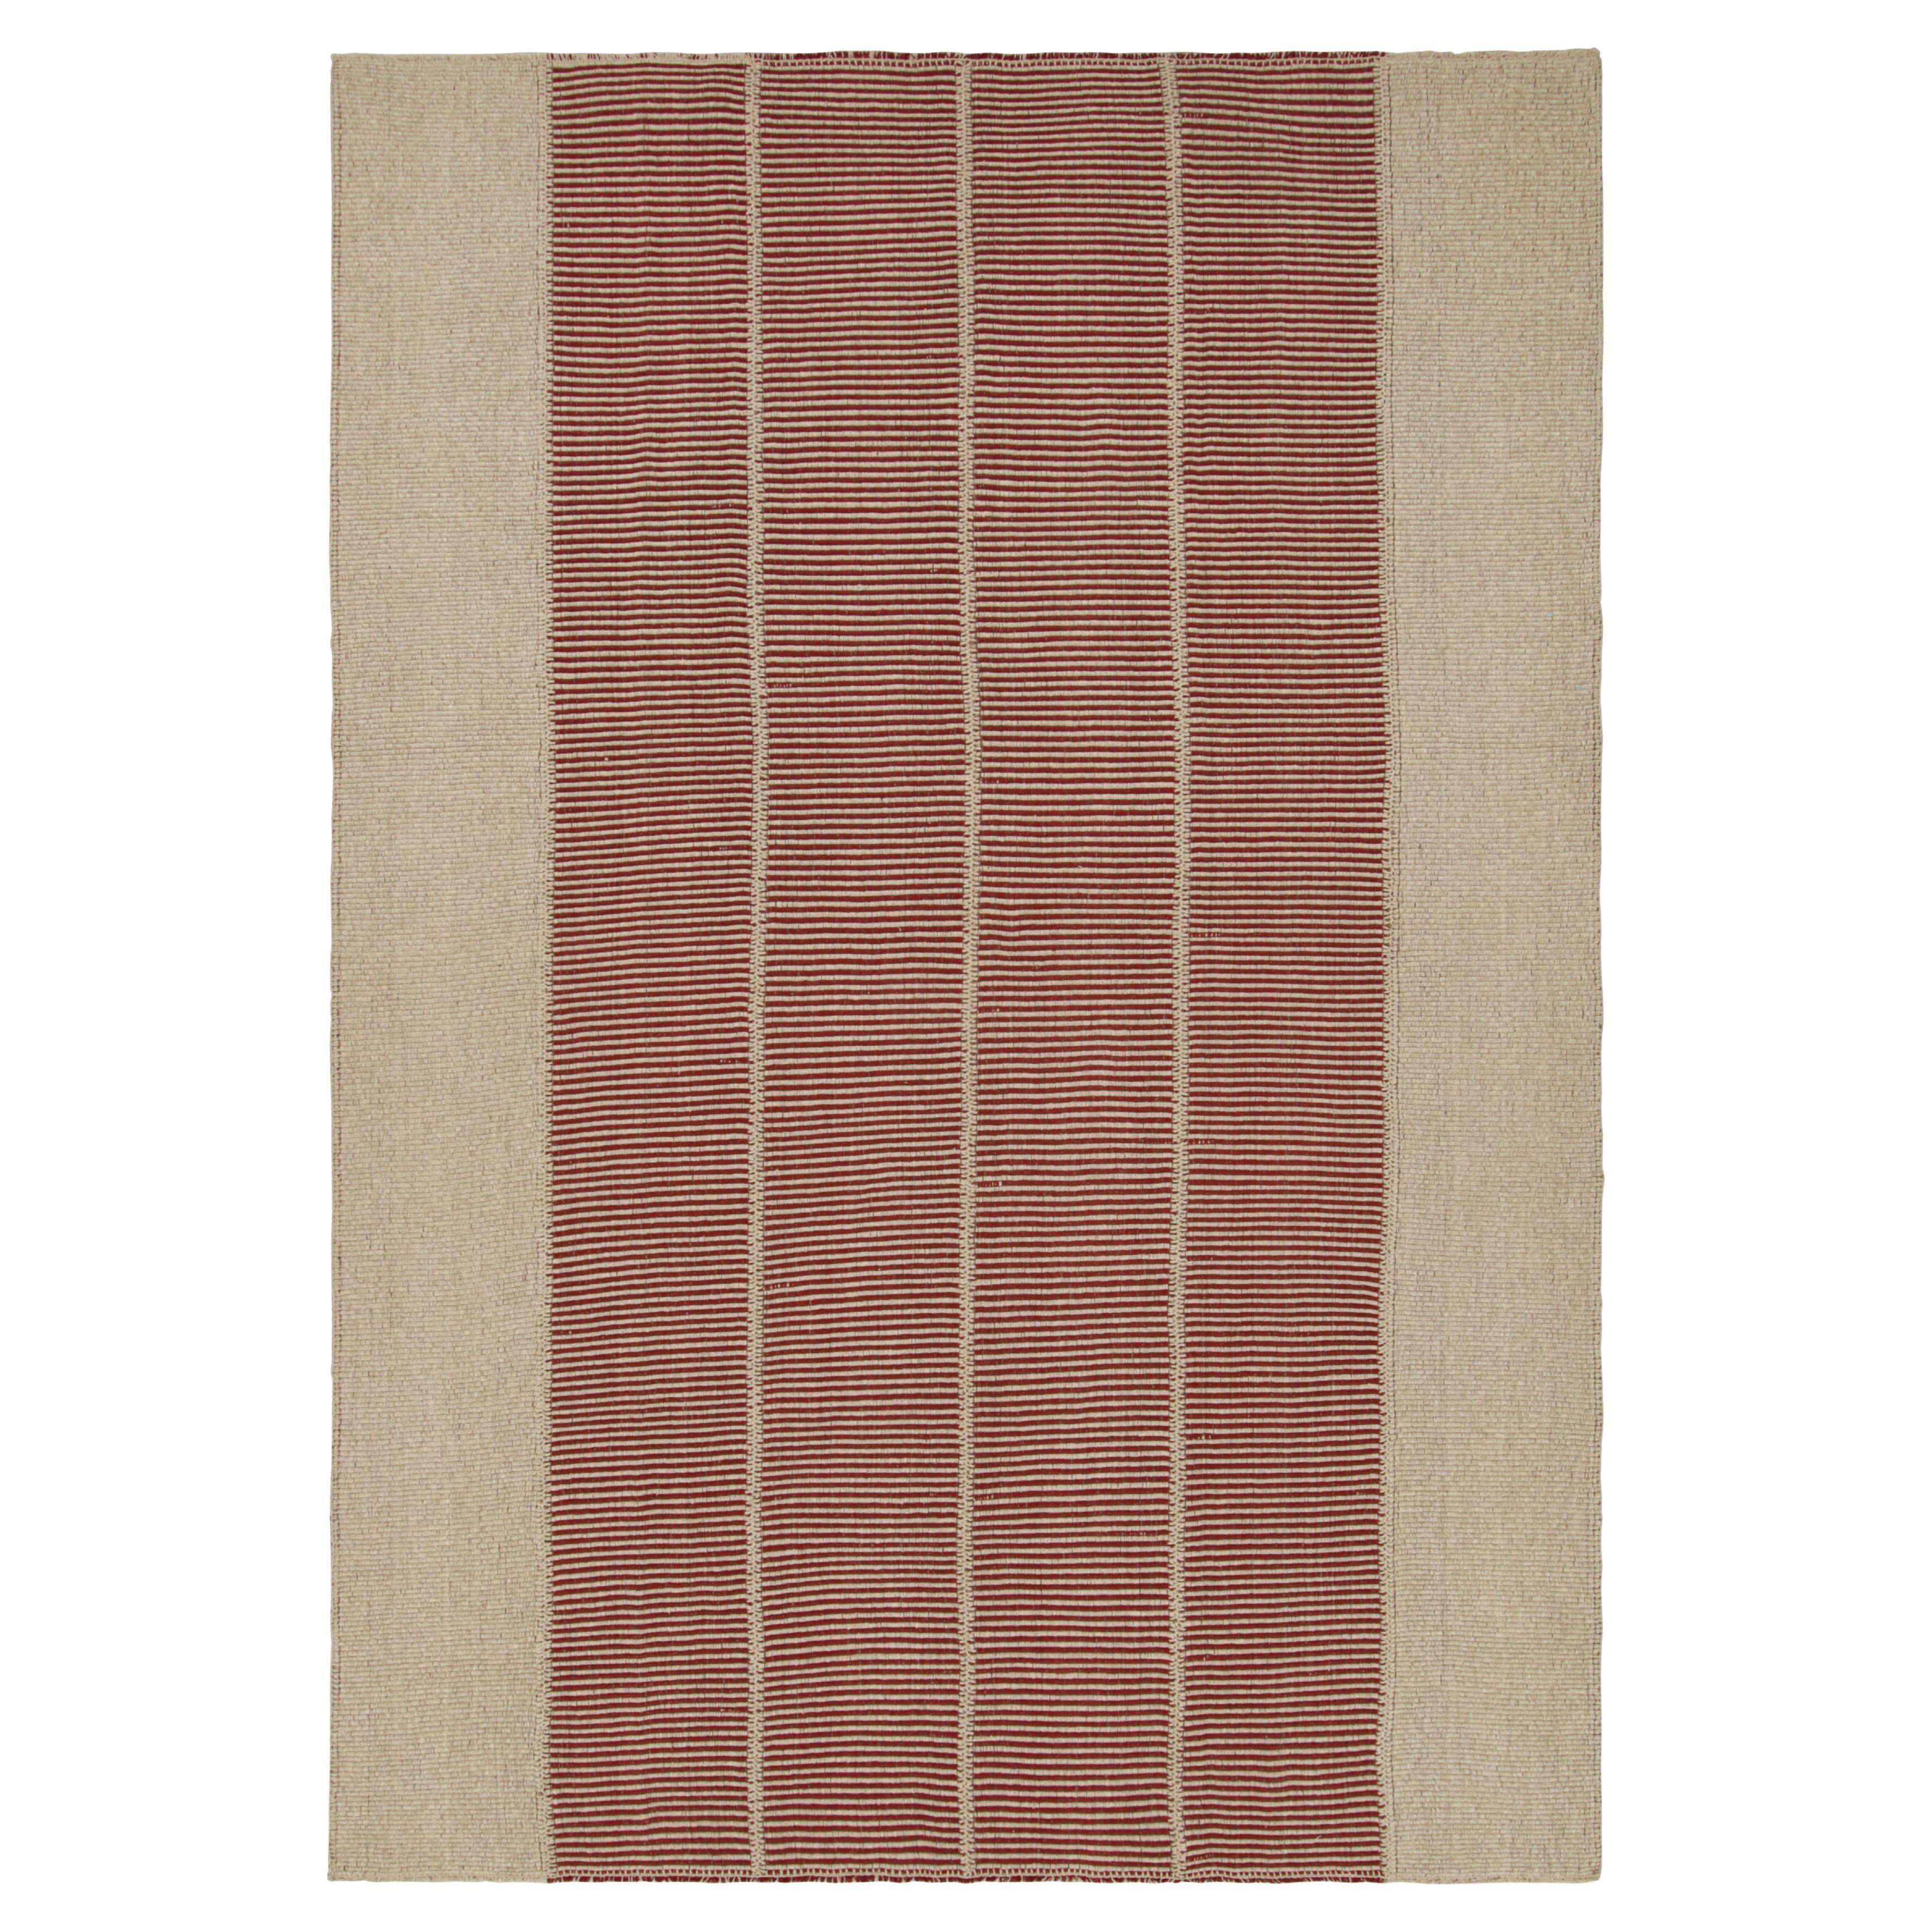 Rug & Kilim’s Contemporary Kilim in Red and Beige Textural Stripes 